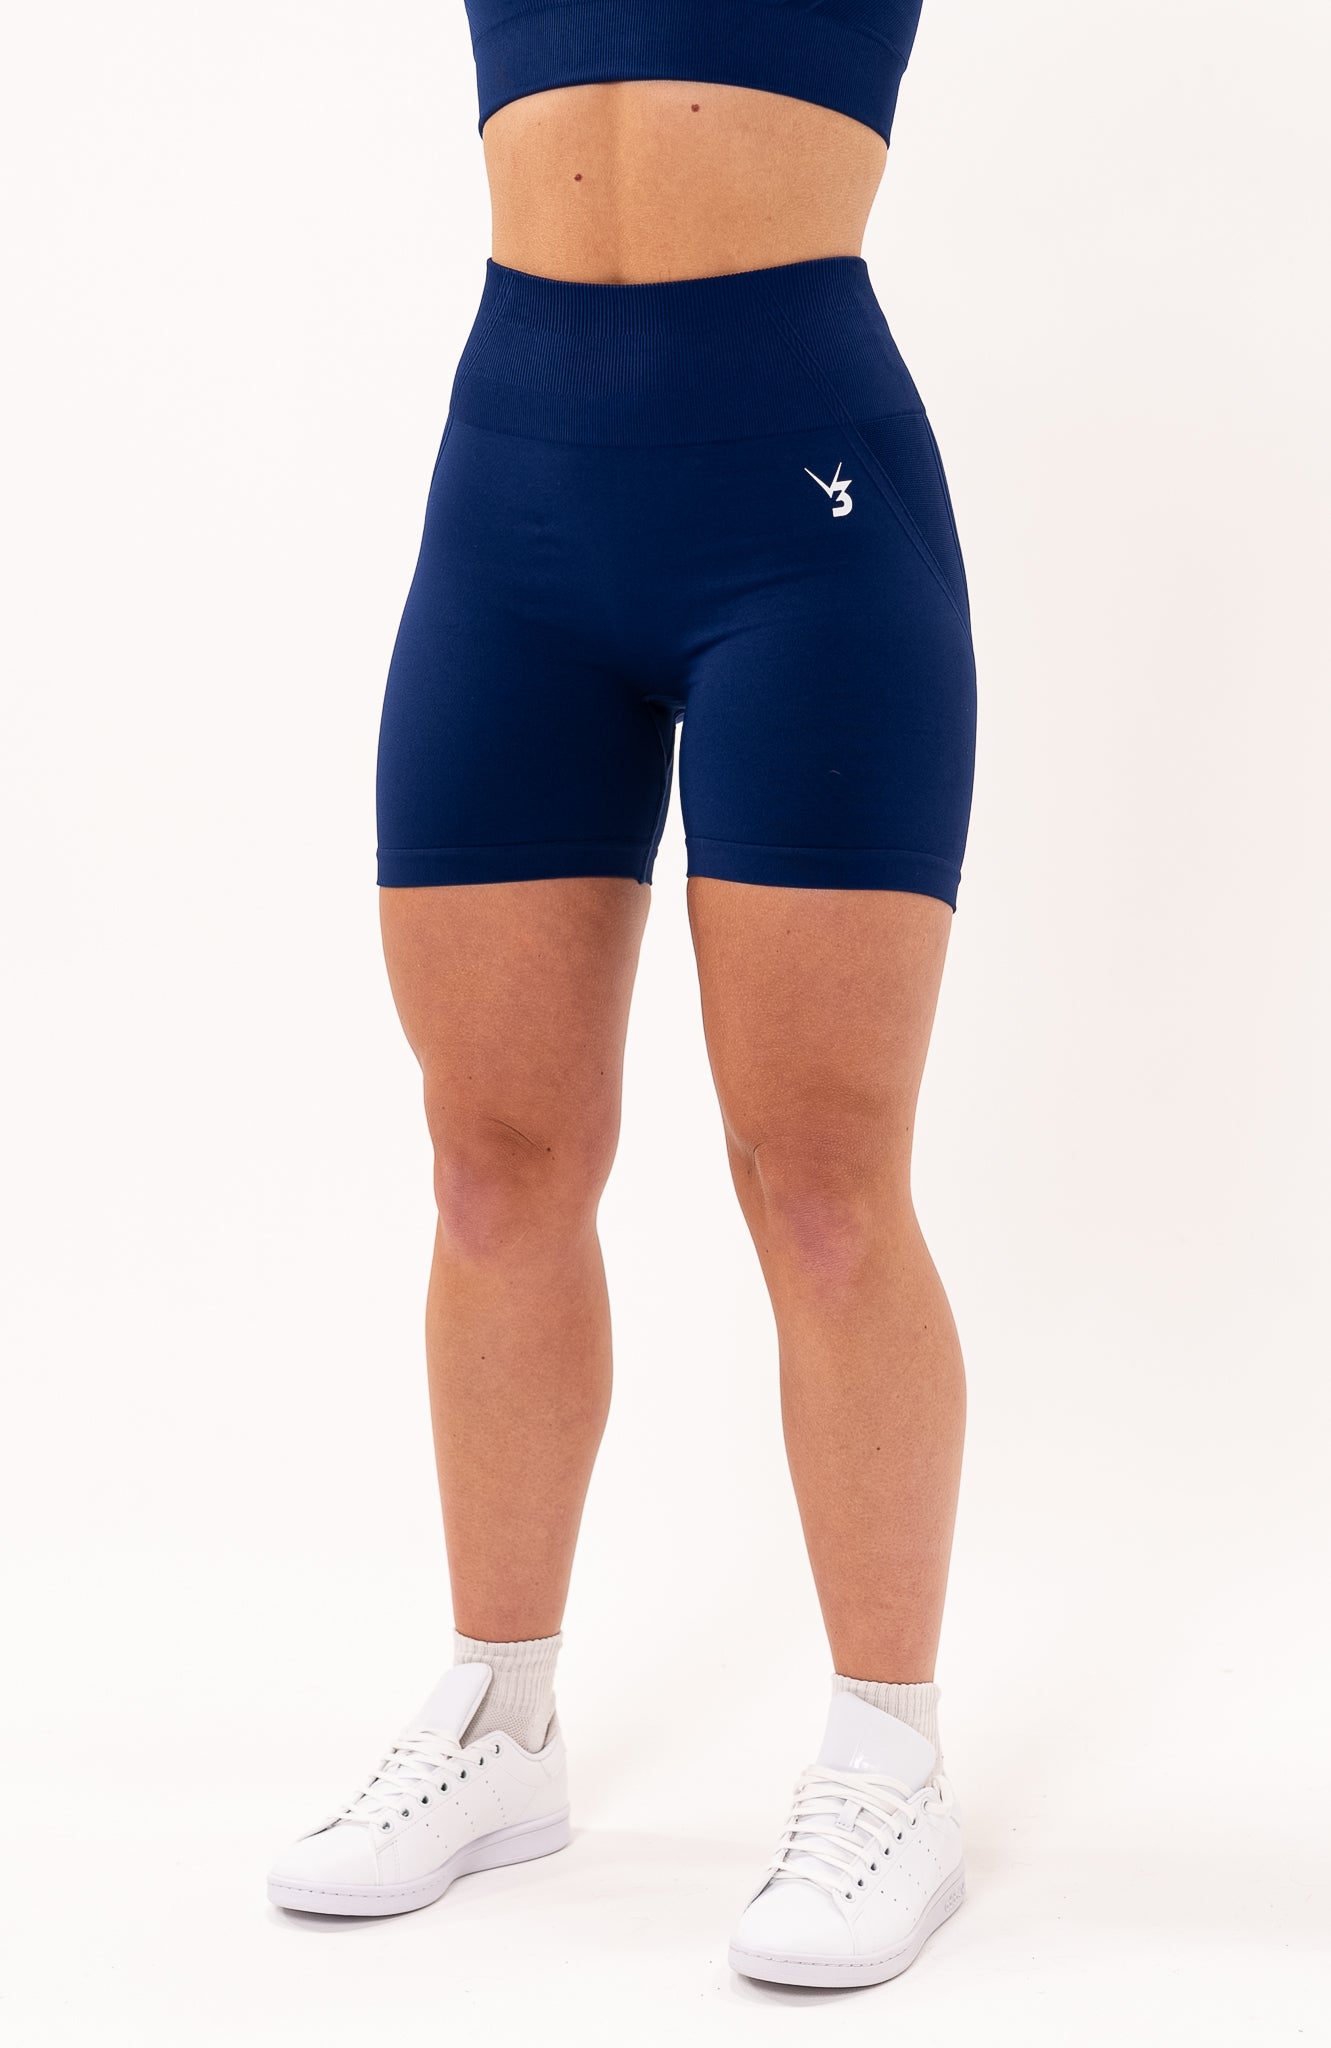 V3 Apparel Women's Tempo seamless scrunch bum shaping high waisted cycle shorts in navy royal blue – Squat proof 5 inch leg gym shorts for workouts training, Running, yoga, bodybuilding and bikini fitness.